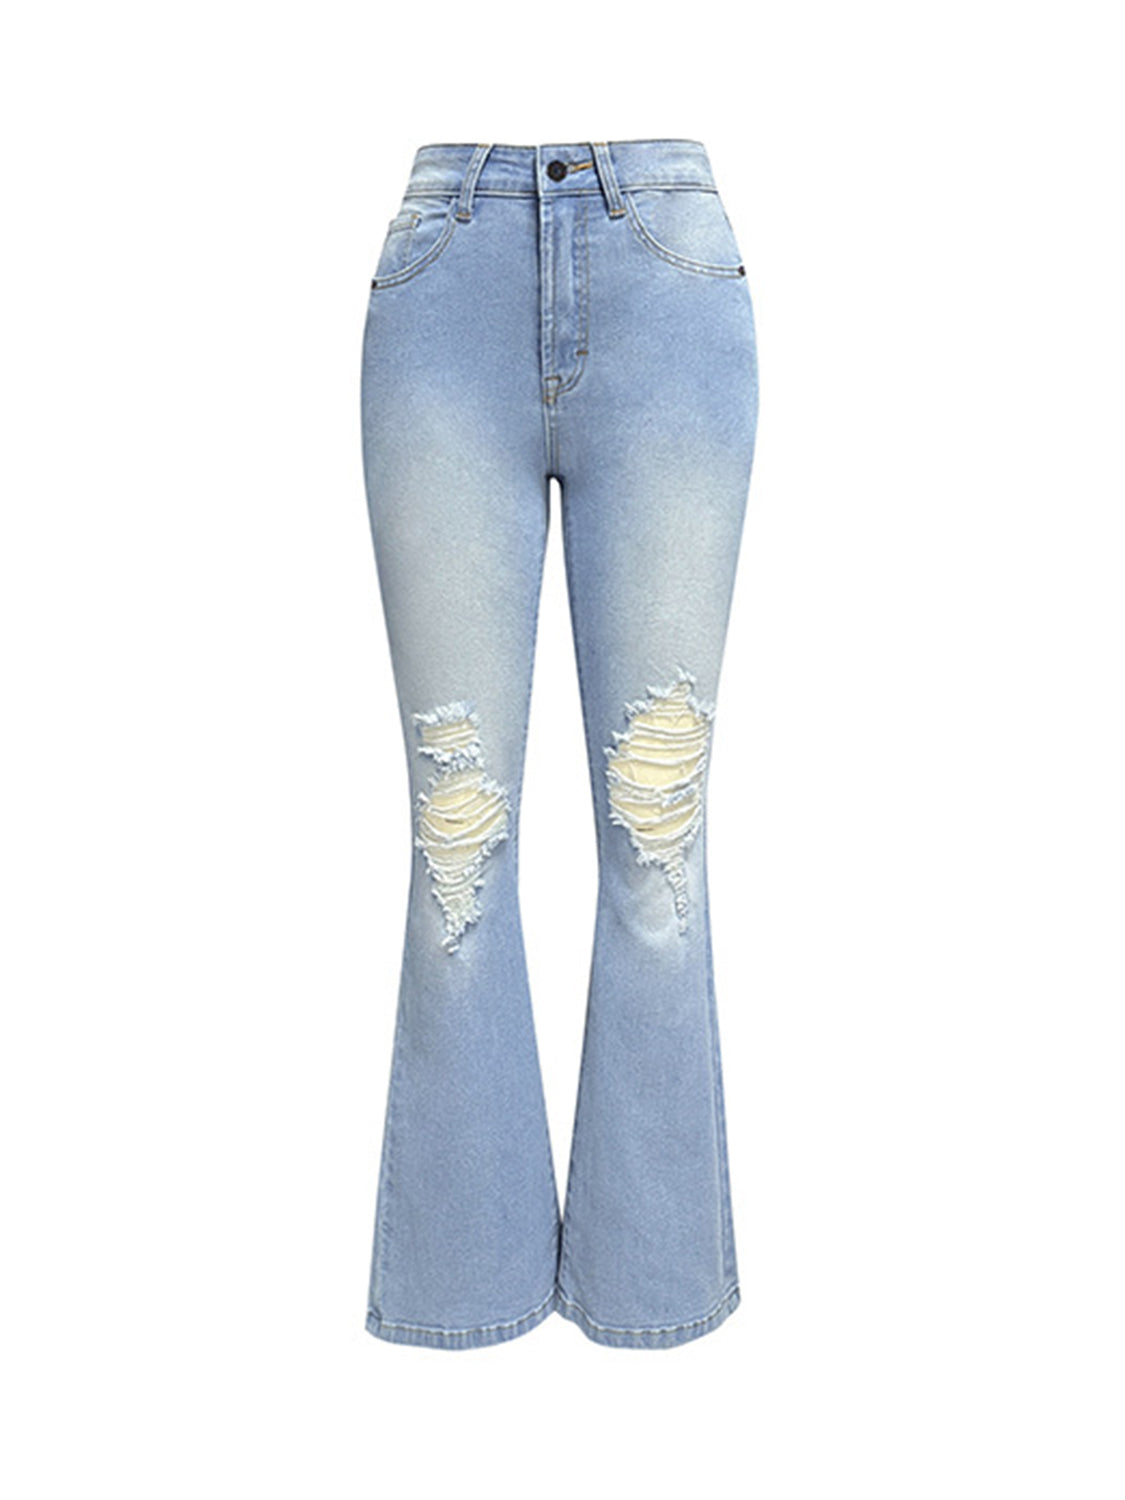 Distressed Bootcut Jeans with Pockets - TRENDMELO